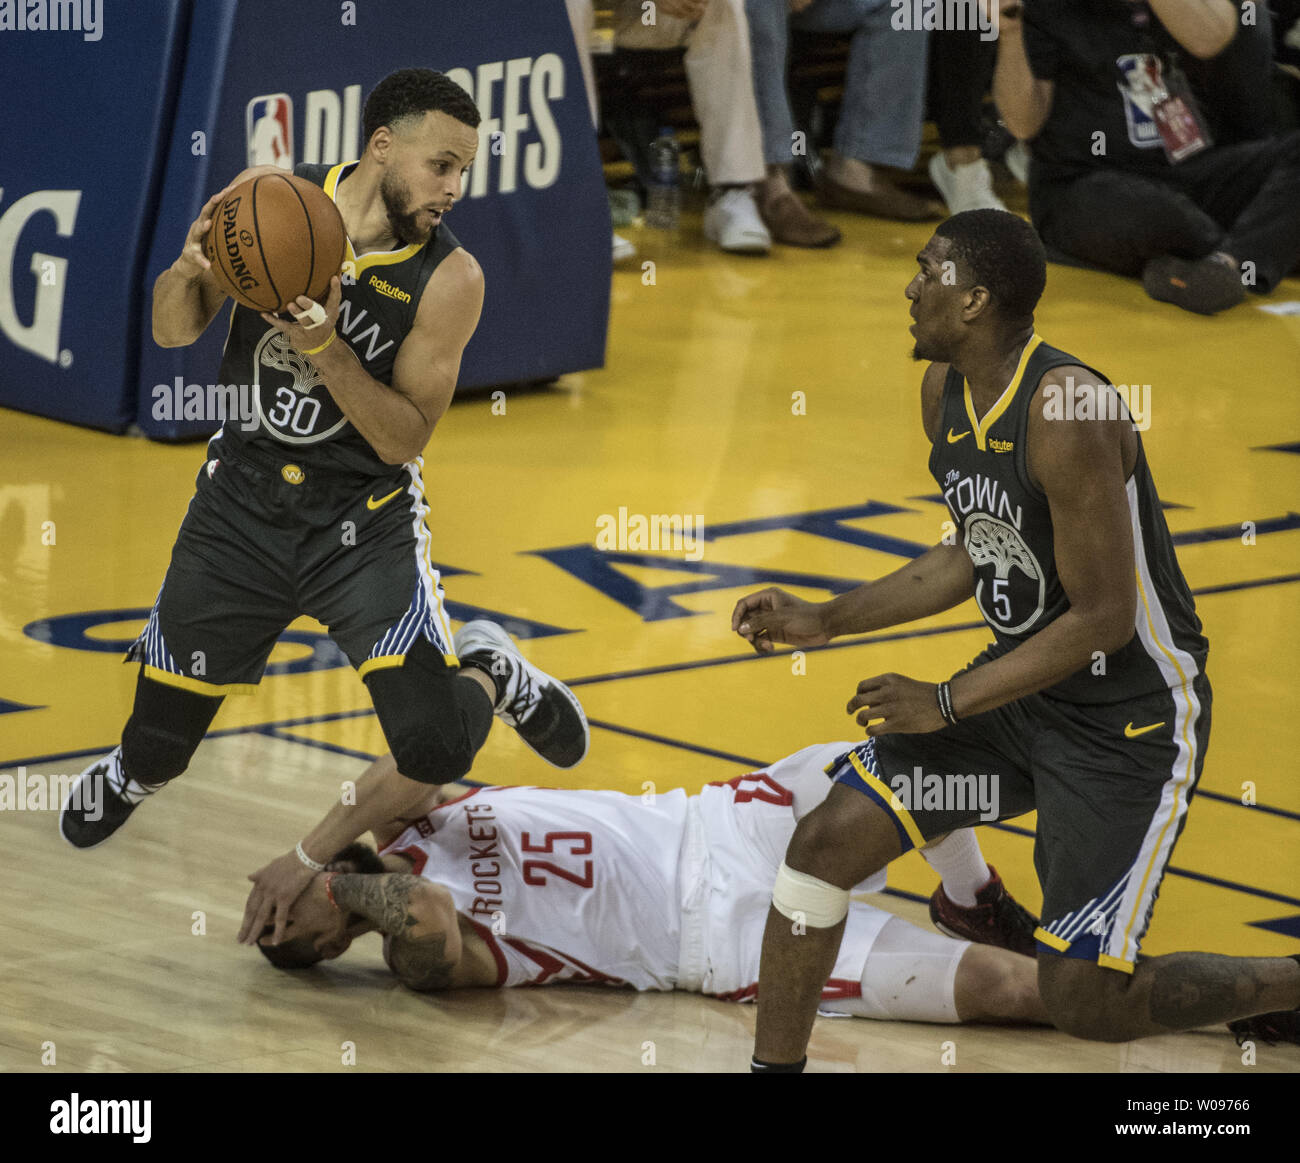 Oakland, United States. 12th Dec, 2019. Golden State Warriors guard Stephen  Curry (30) steals the ball from Houston Rockets guard Austin Rivers (25) in  the second half of game two of the